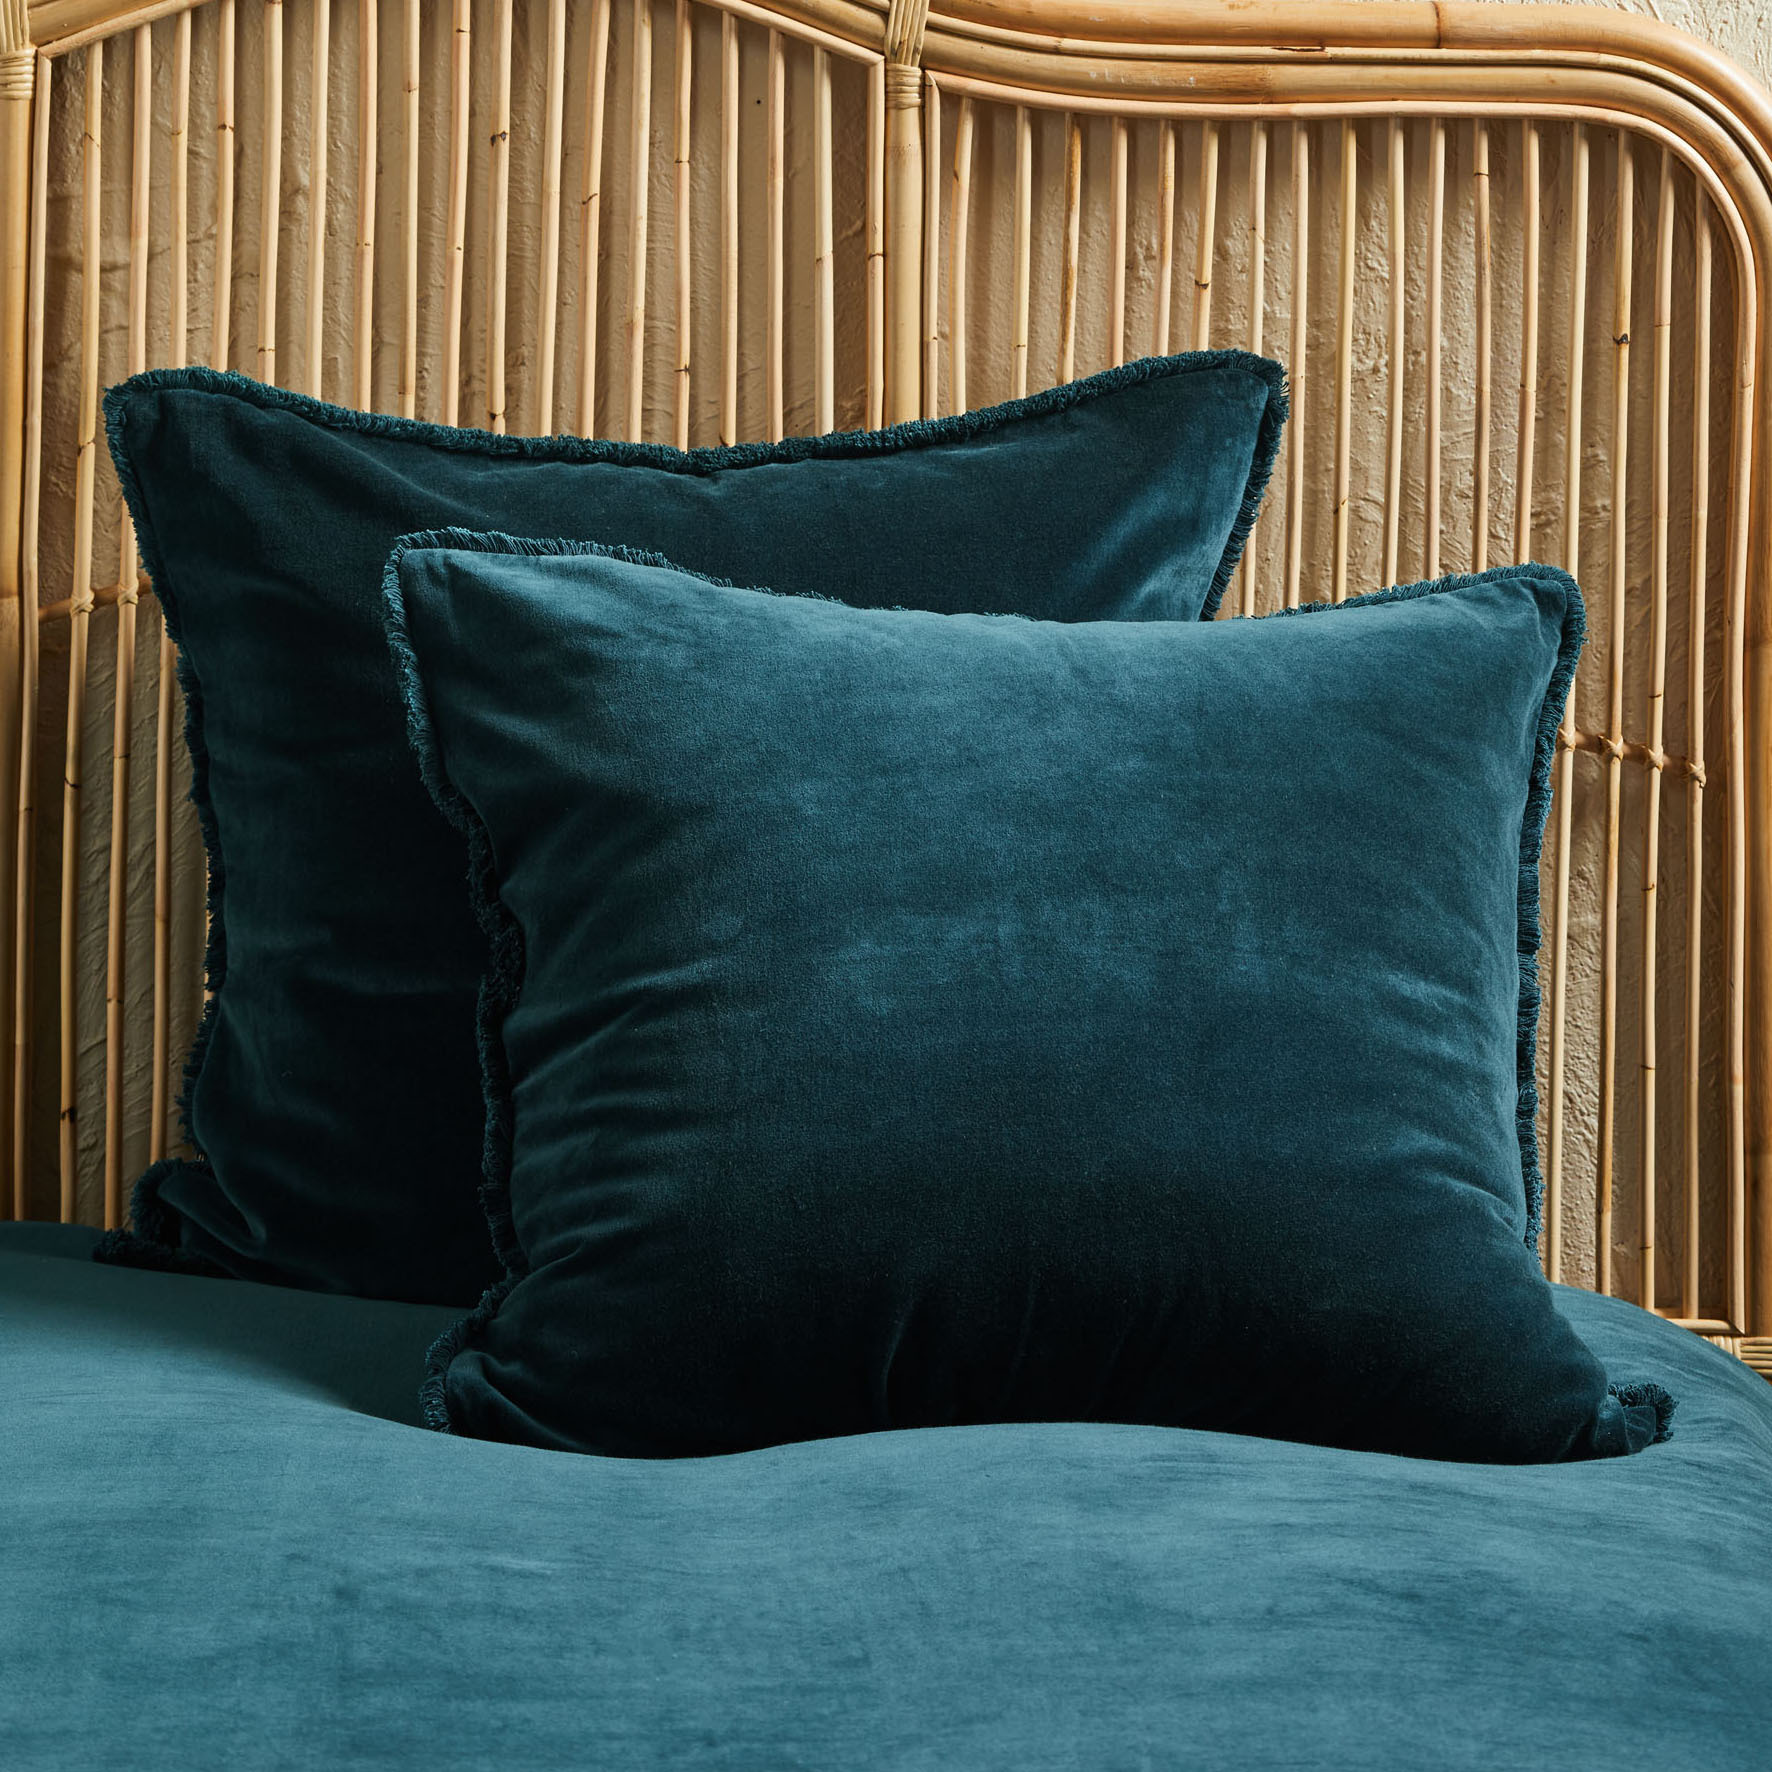 teal pillow cases